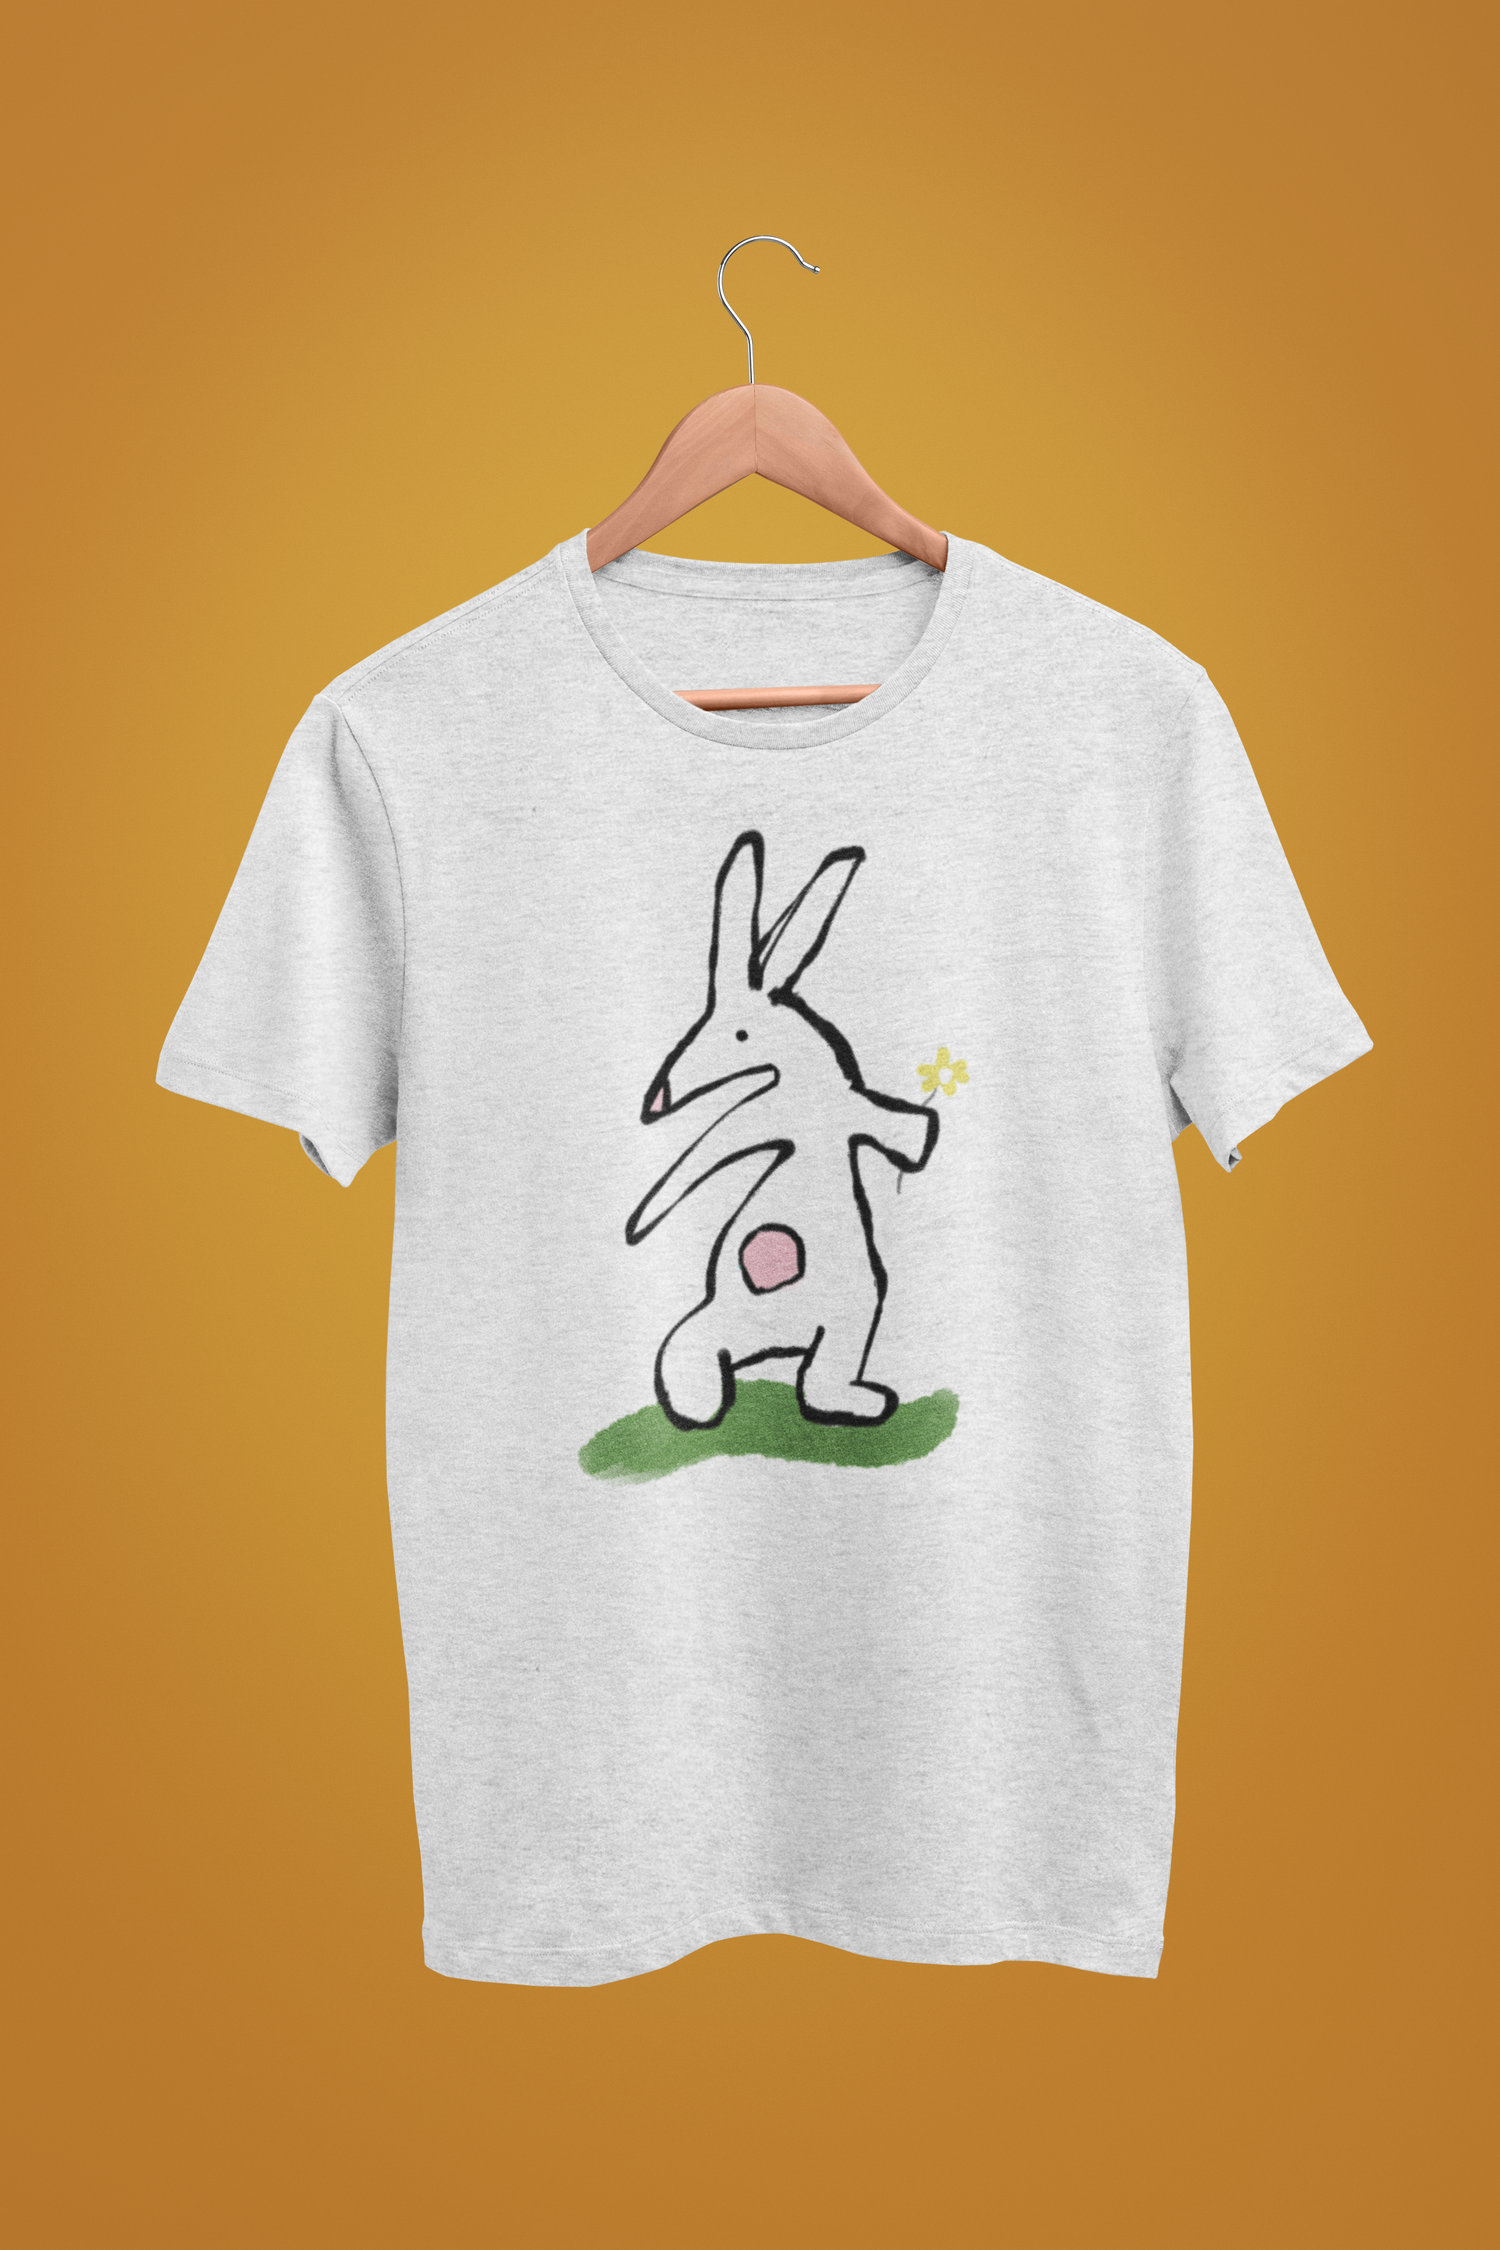 Bunny T-shirt - Illustrated rabbit holding a flower design on cream heather grey vegan cotton t-shirt - Easter Bunny t-shirts by Hector and Bone